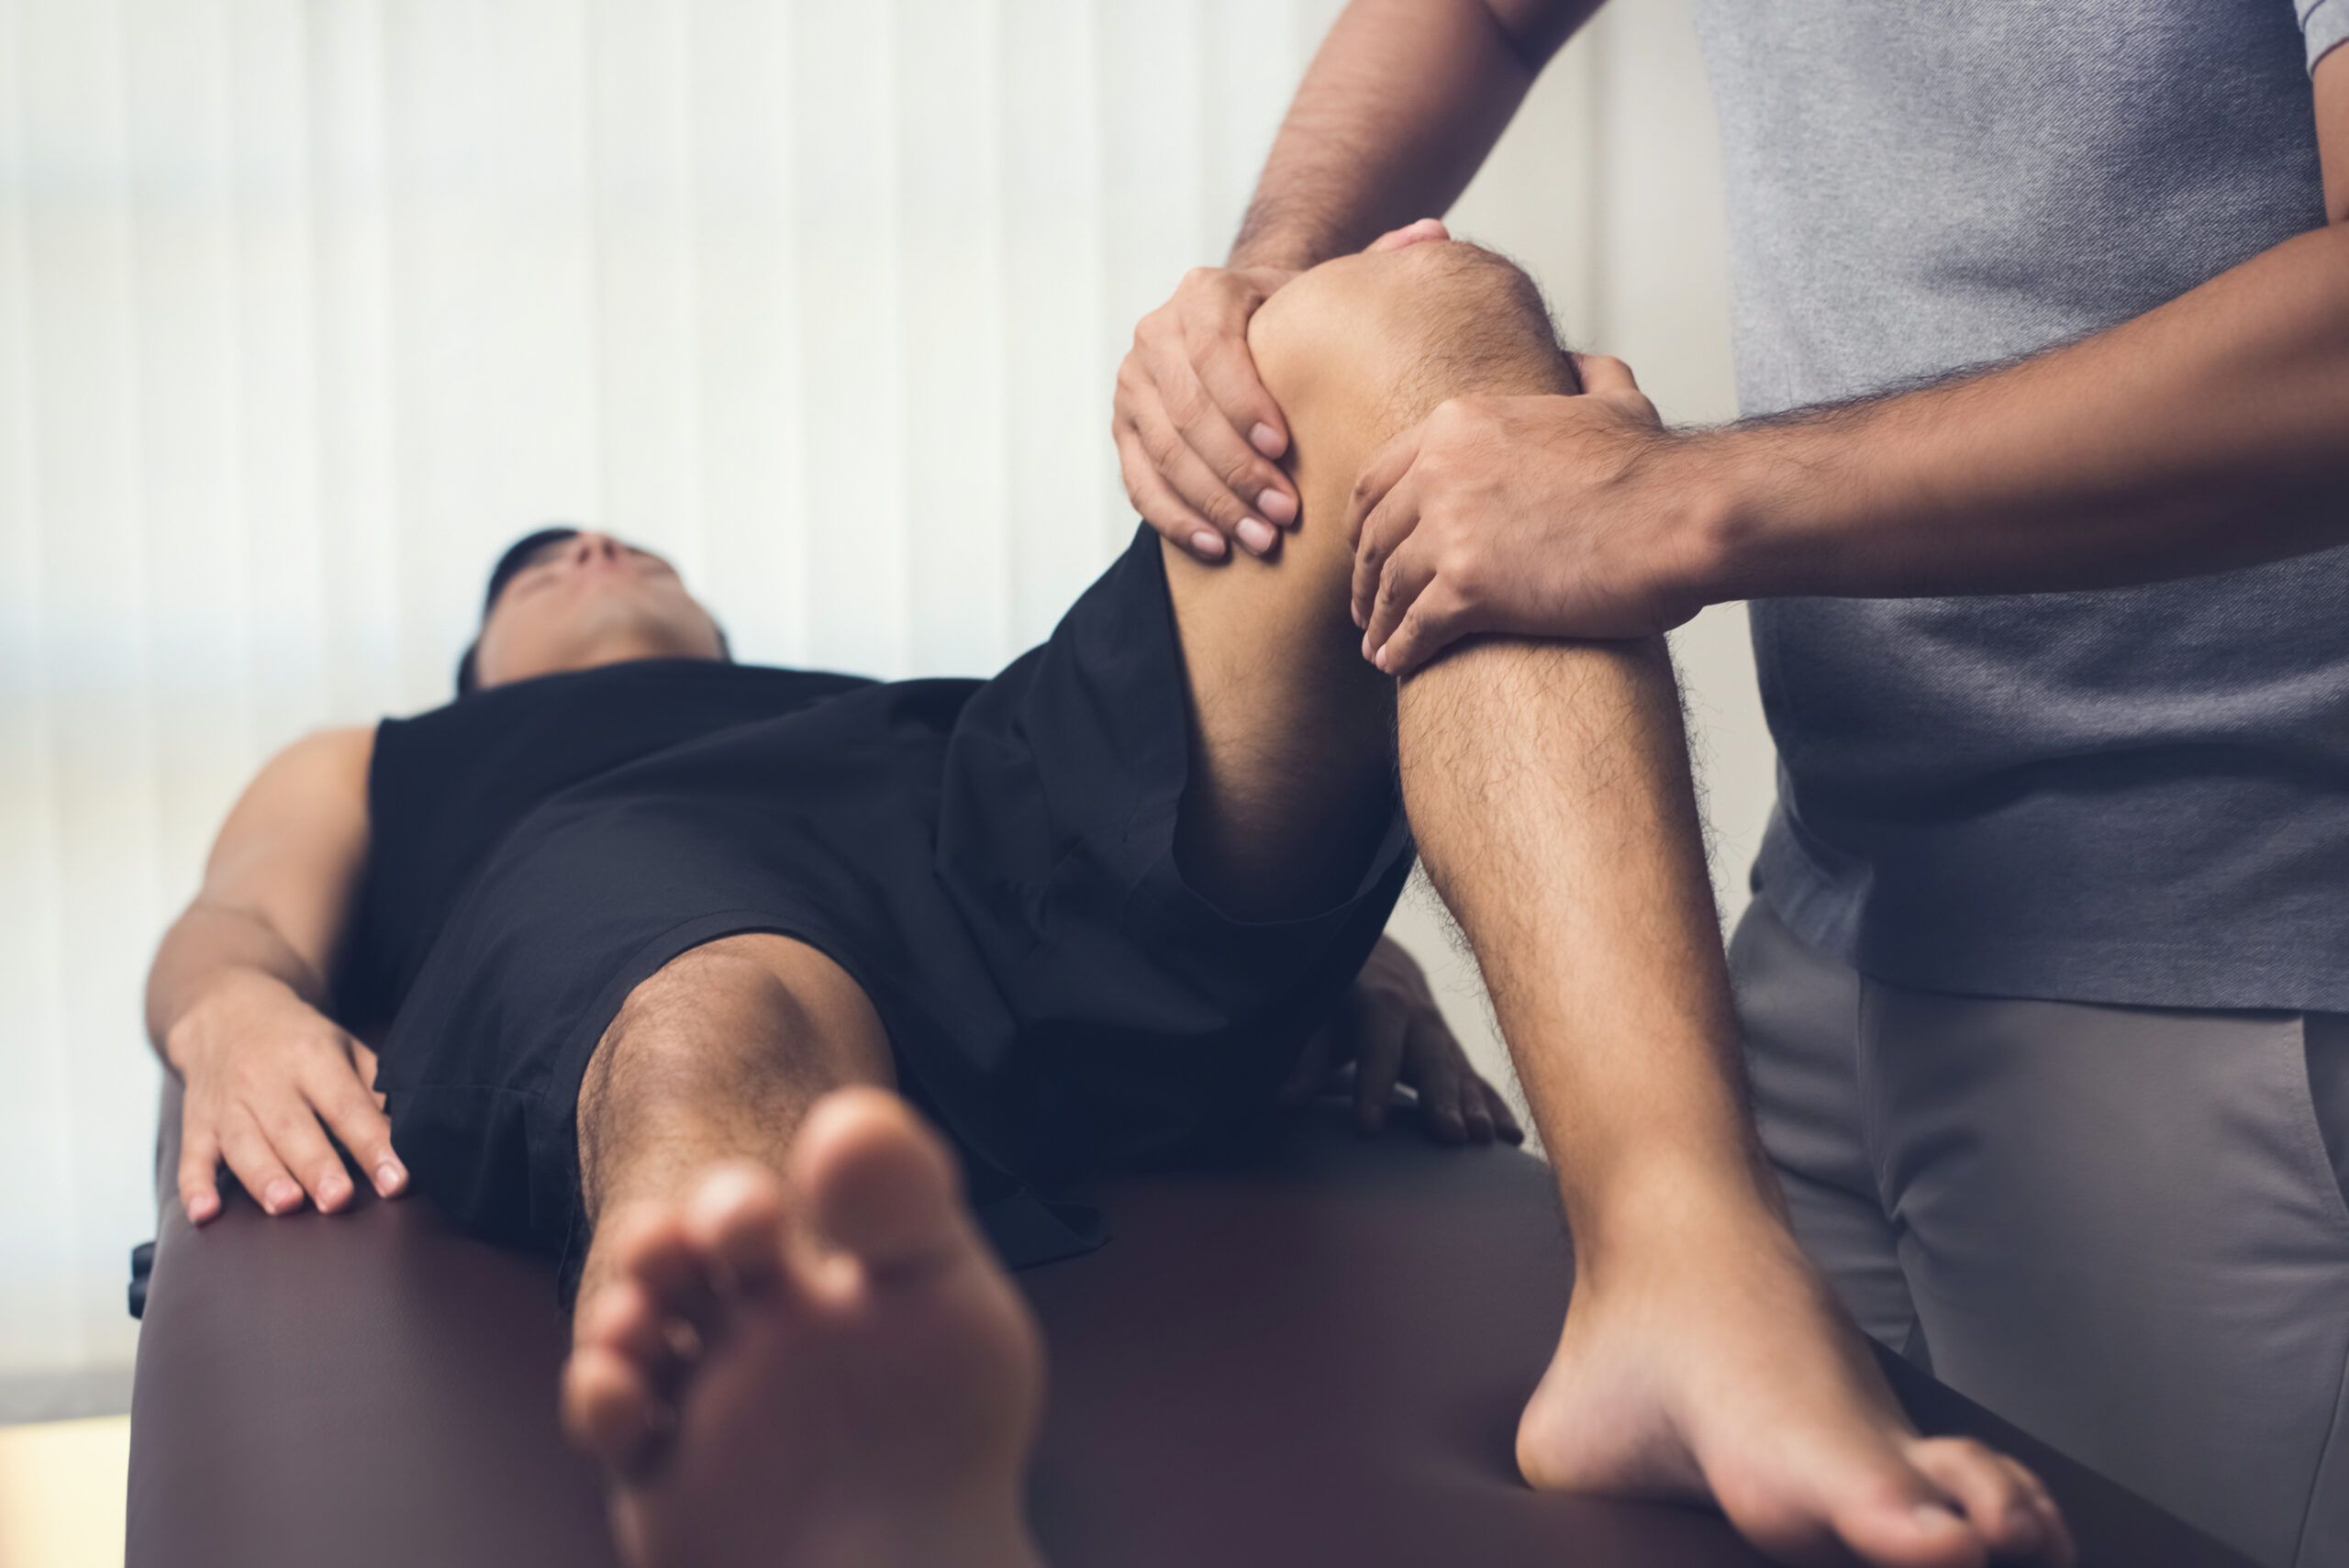 Male physical therapist working on the knee of athlete patient in a professional physical therapy clinic